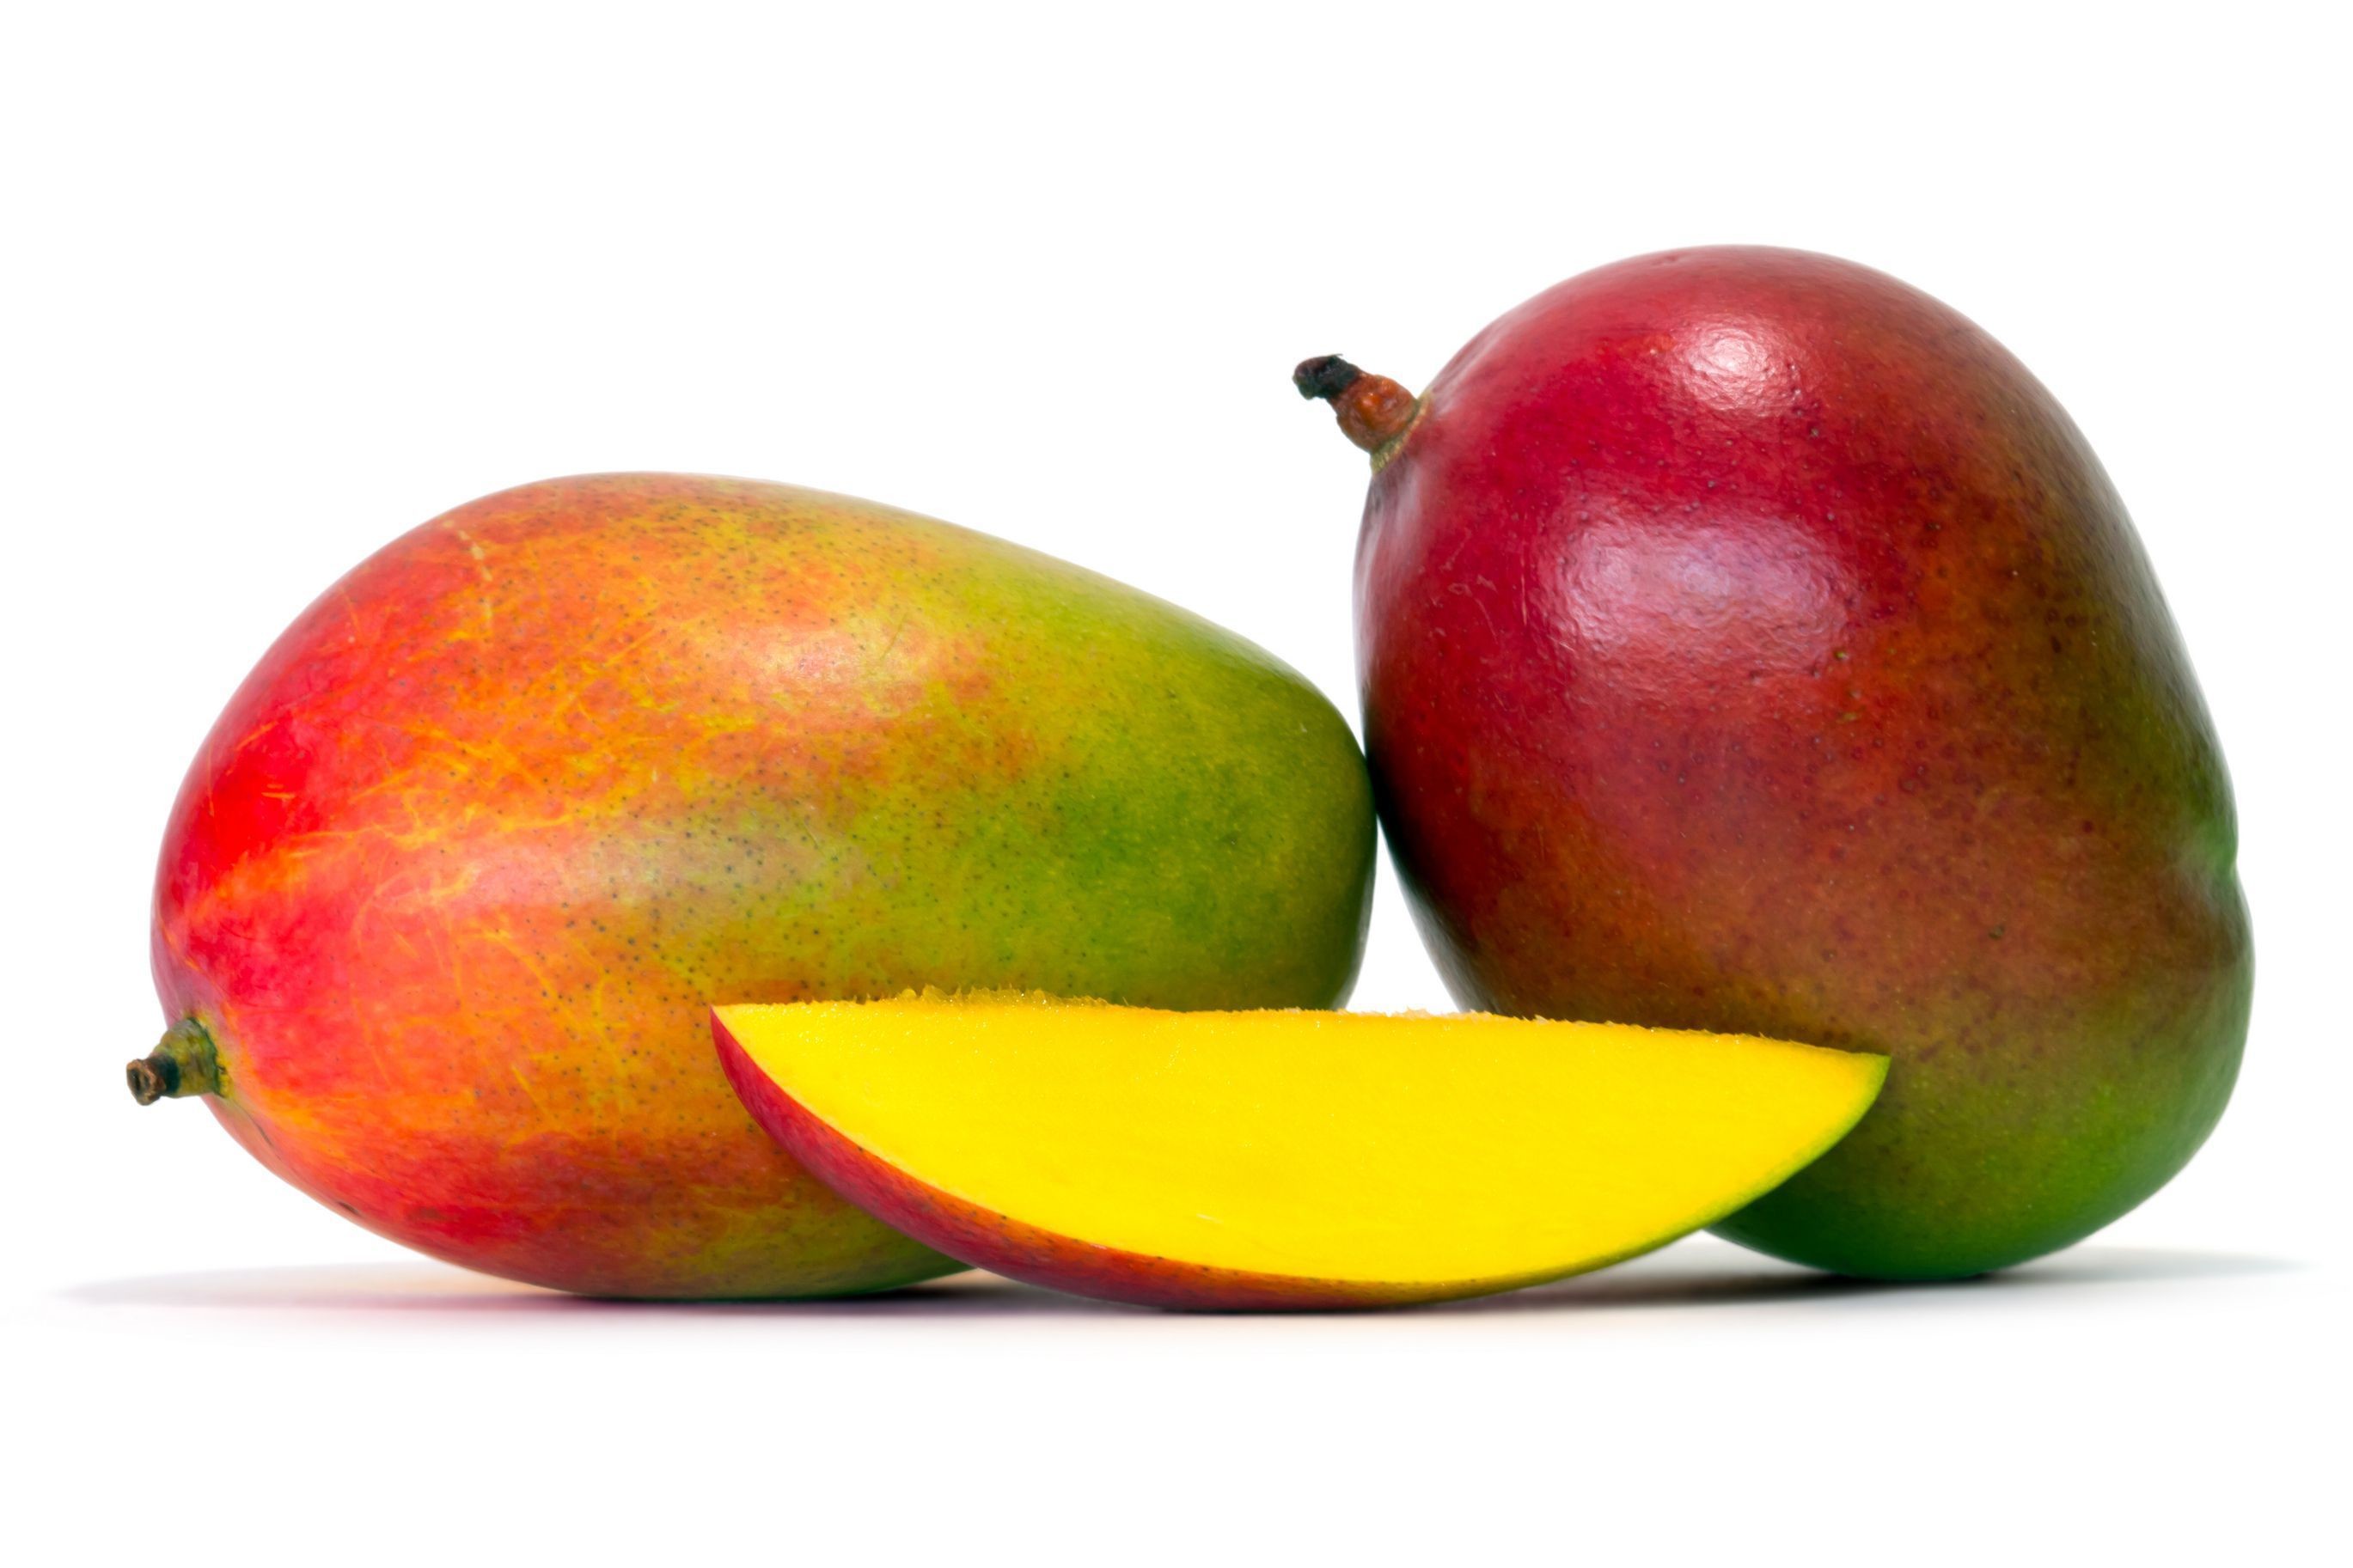 Mango Wallpapers Images Photos Pictures Backgrounds 2738x1825